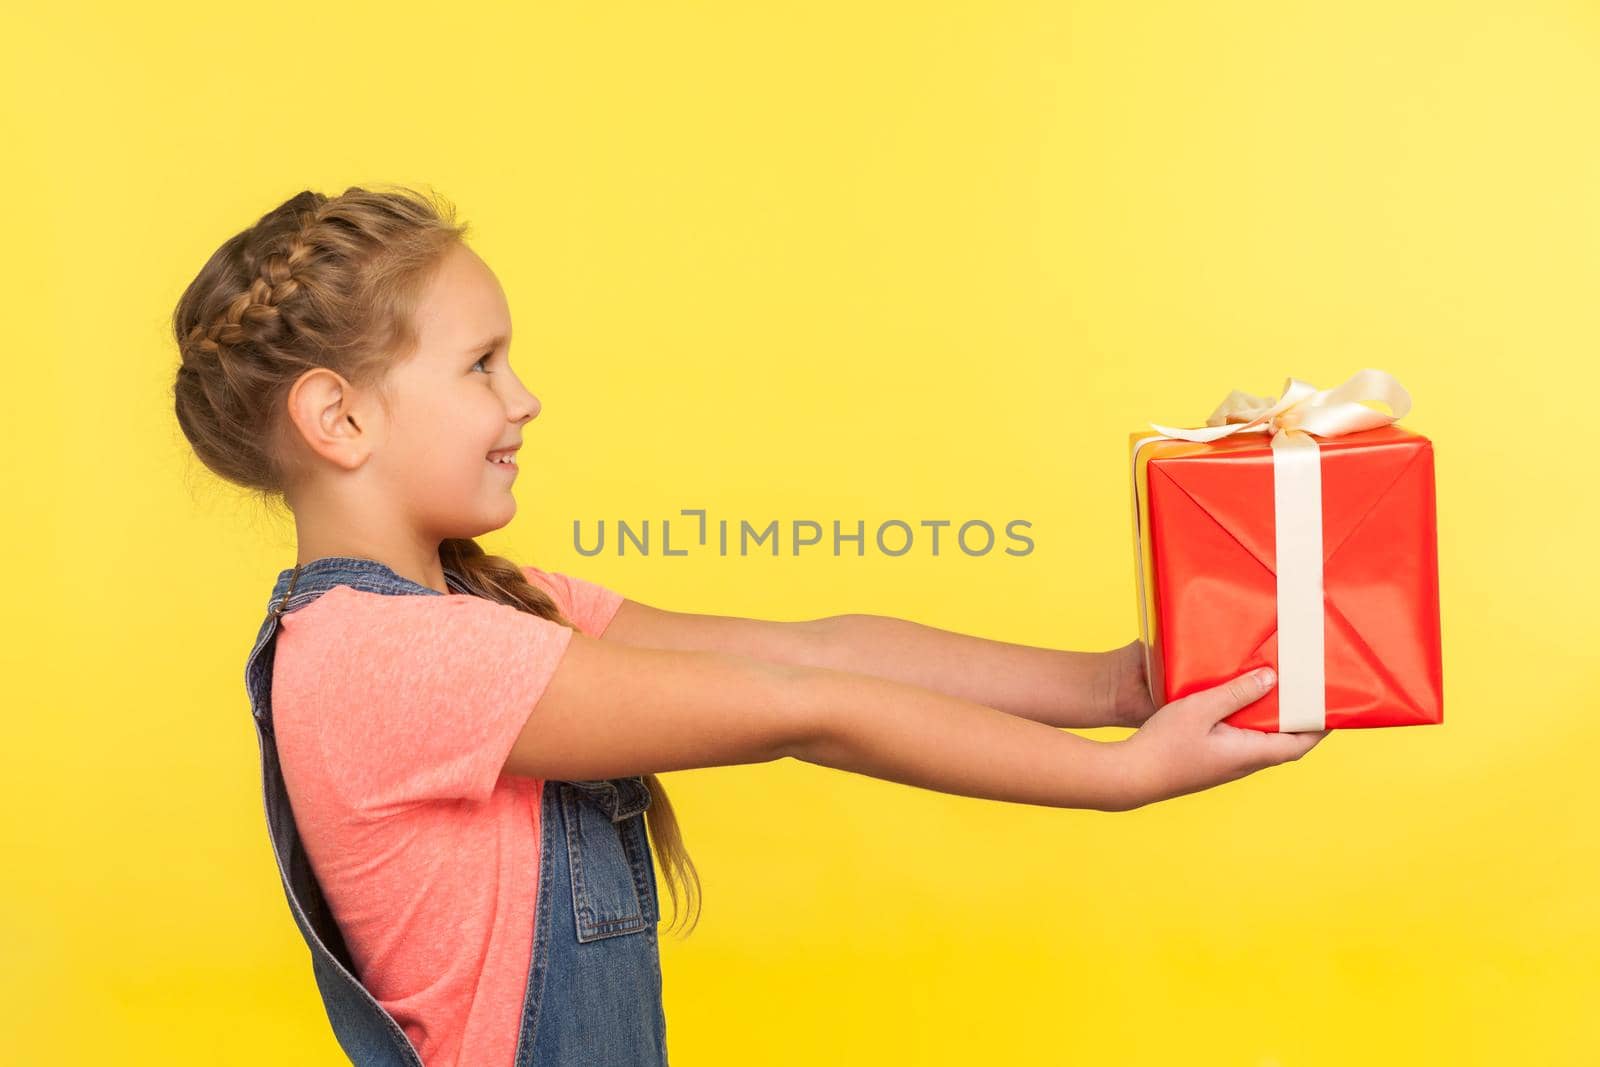 Take it. Side view of cute little girl with braid looking up and giving decorated present, generous child sharing christmas gift, kindness and charity. indoor studio shot isolated on yellow background